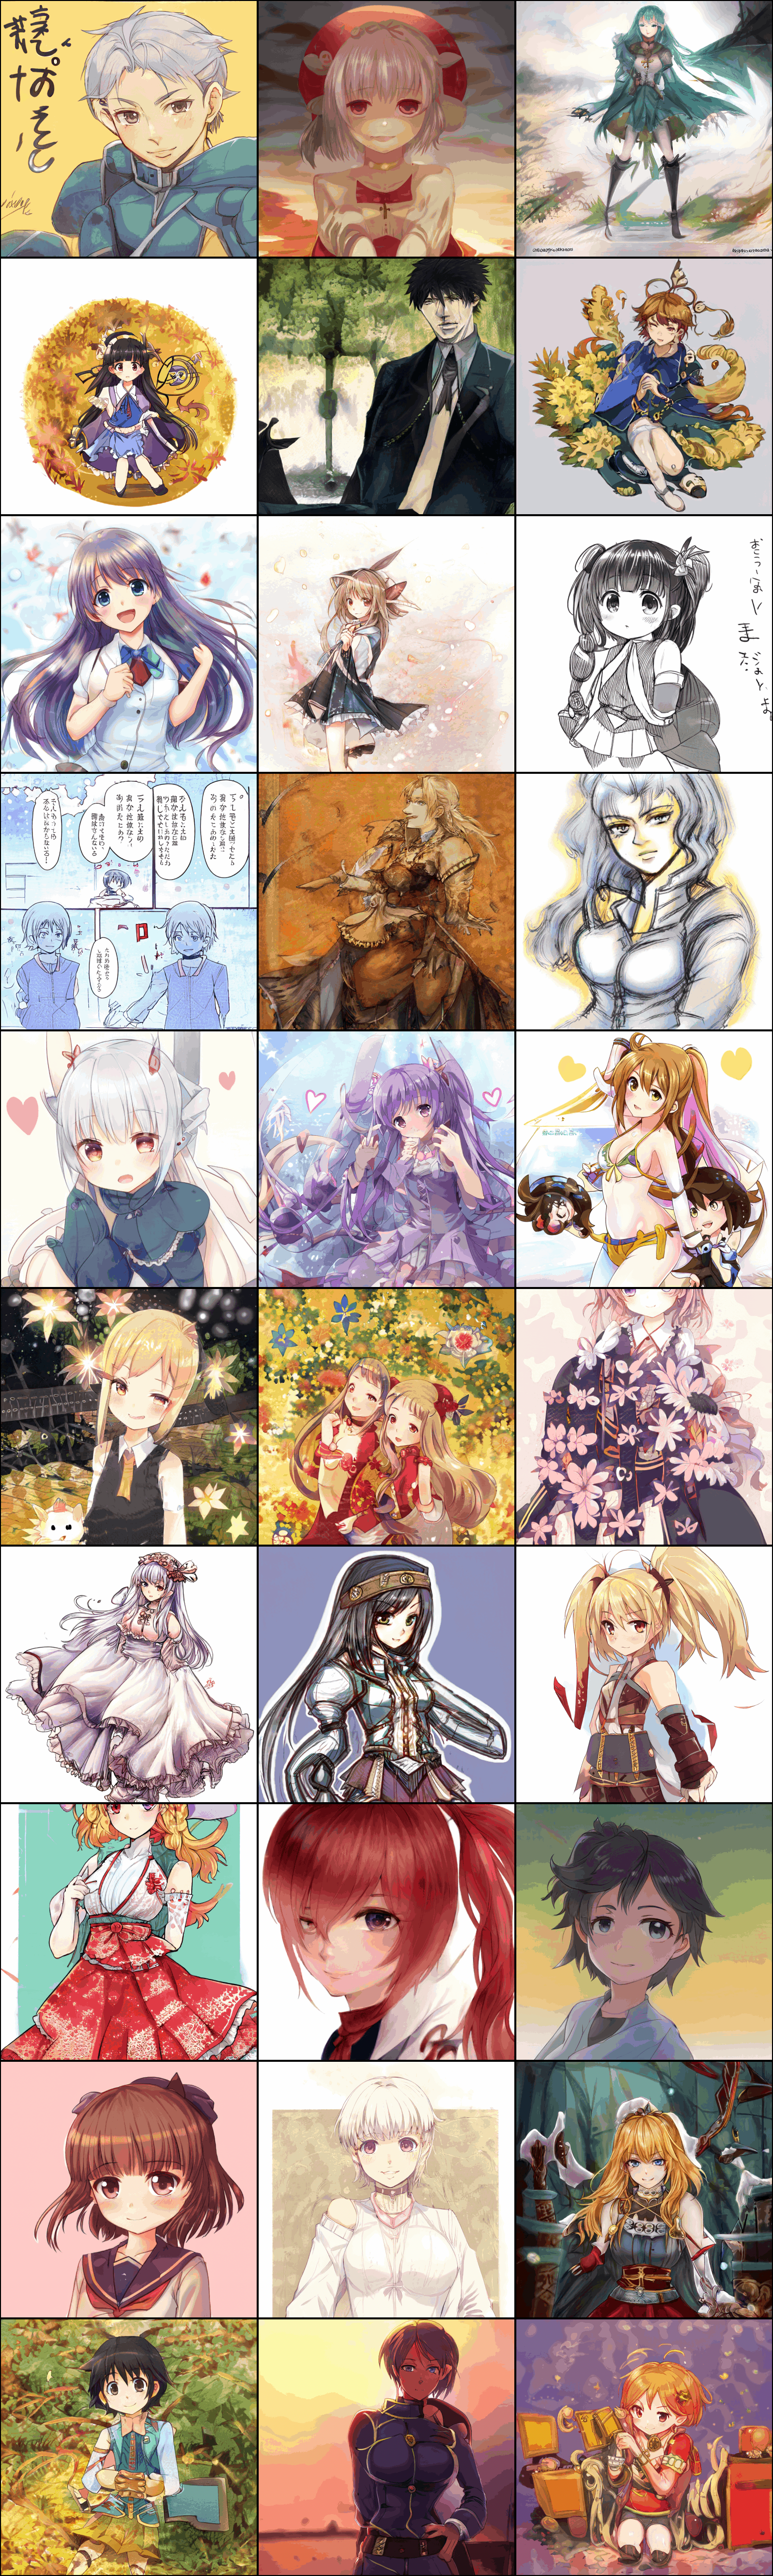 30 neural-net-generated anime samples from Aydao’s Danbooru2019 StyleGAN2-ext model (additional sets: 1, 2, 3; clustered in 256 classes by l4rz); samples are hand-selected for being pretty, interesting, or demonstrating something.